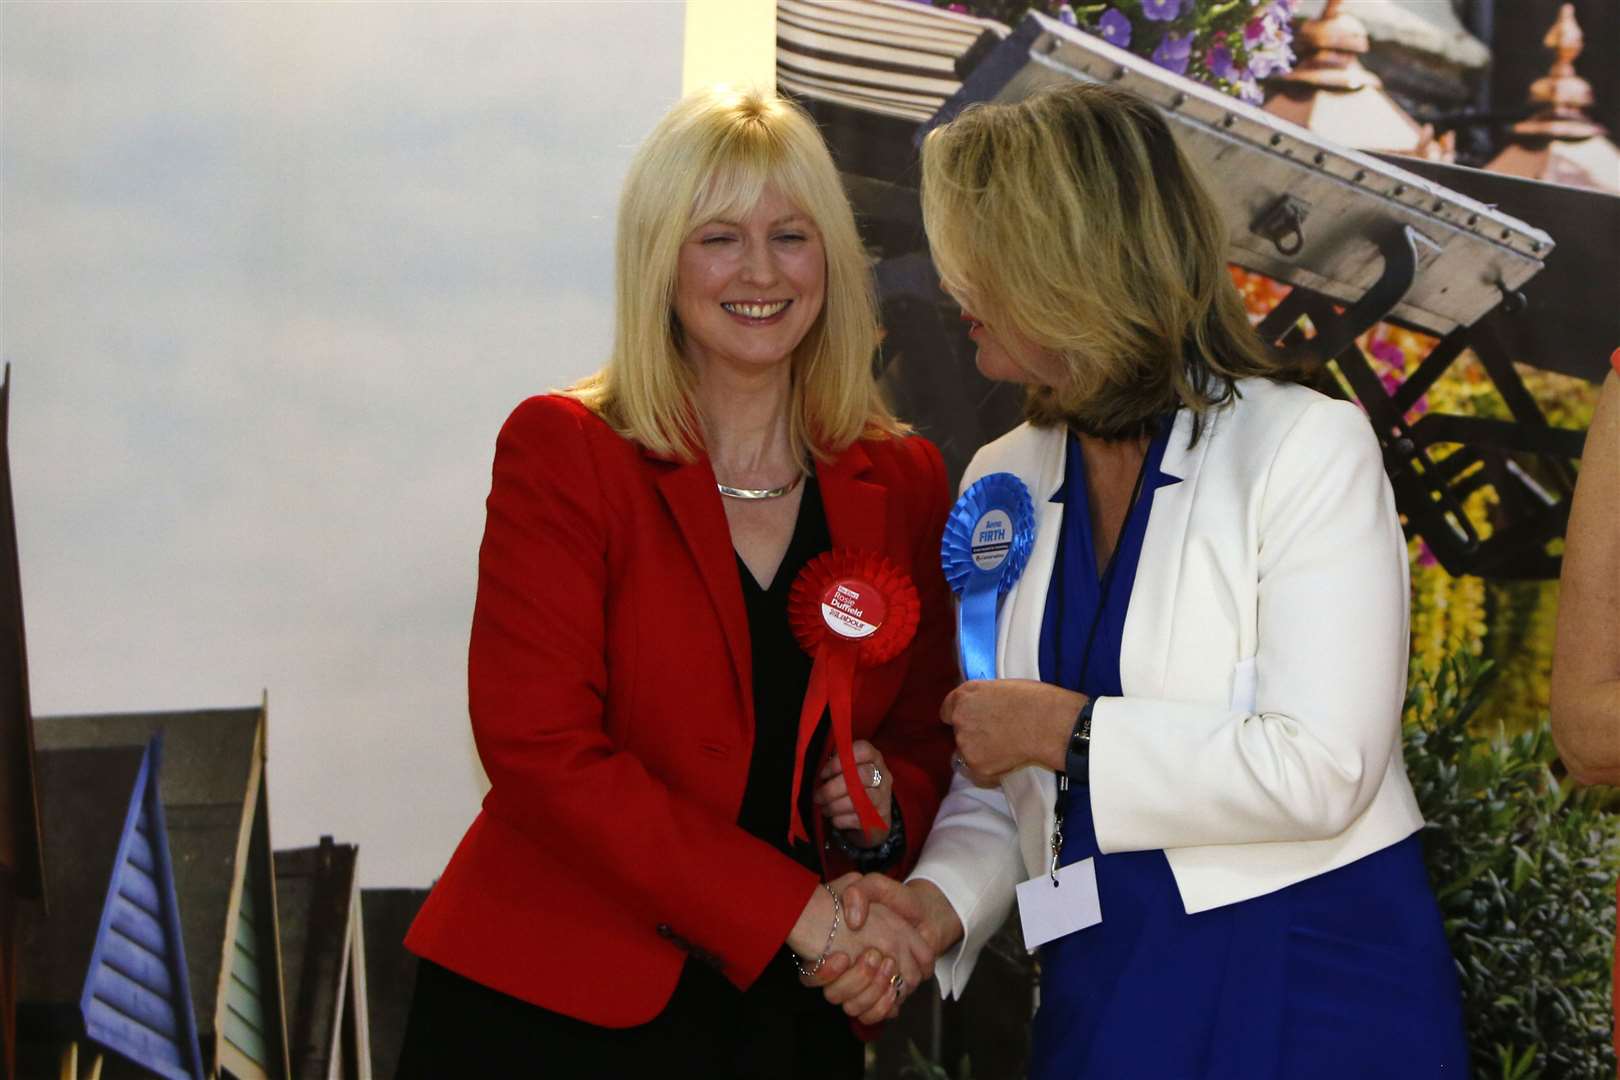 Rosie Duffield shakes hands with Conservative rival Anna Firth after winning the seat for Labour for the second time in two years (Picture: Andy Jones)